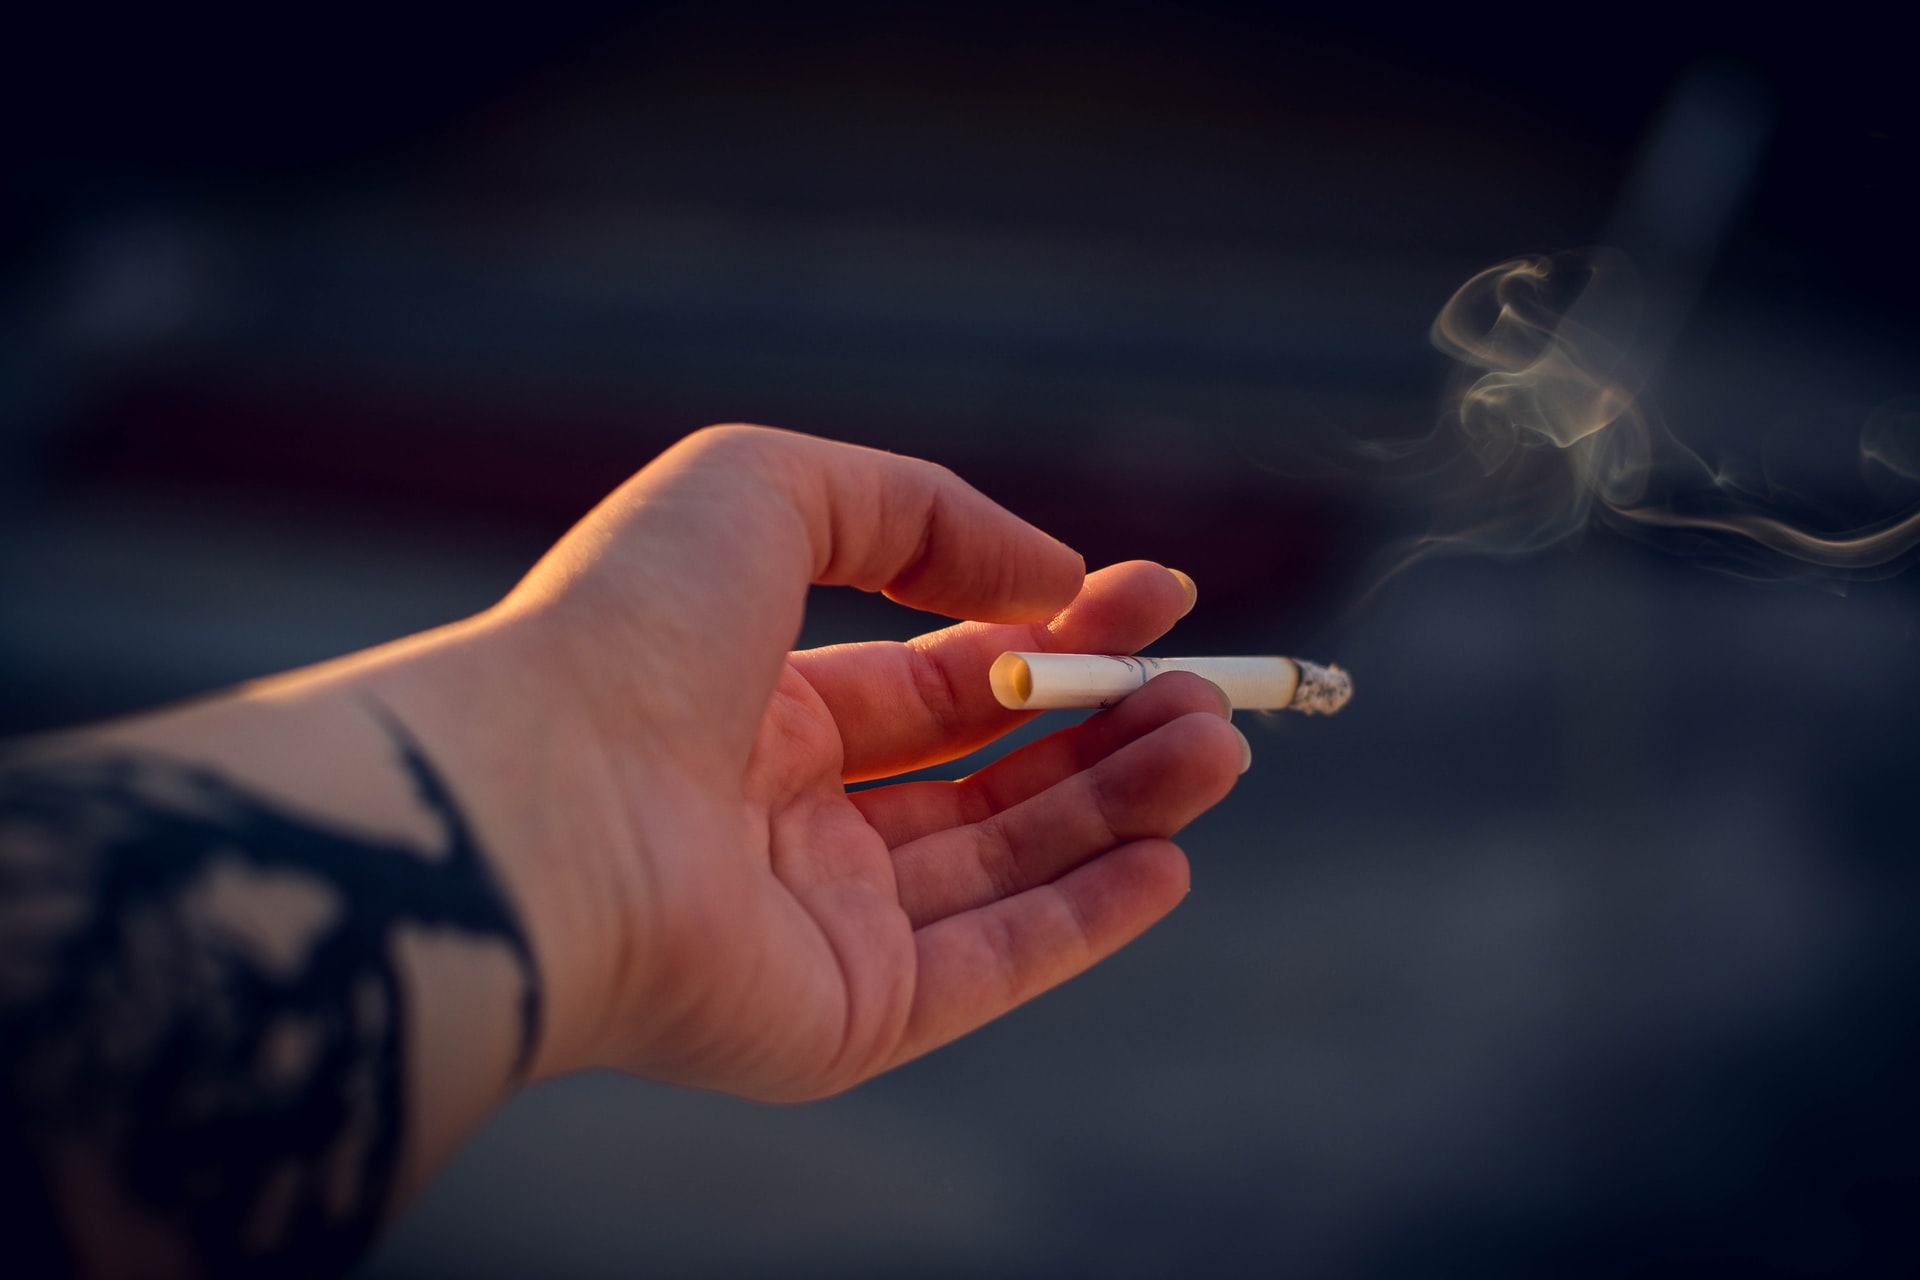 New Finding Cigarette Smoking Declines Among Those With Addiction, Depression